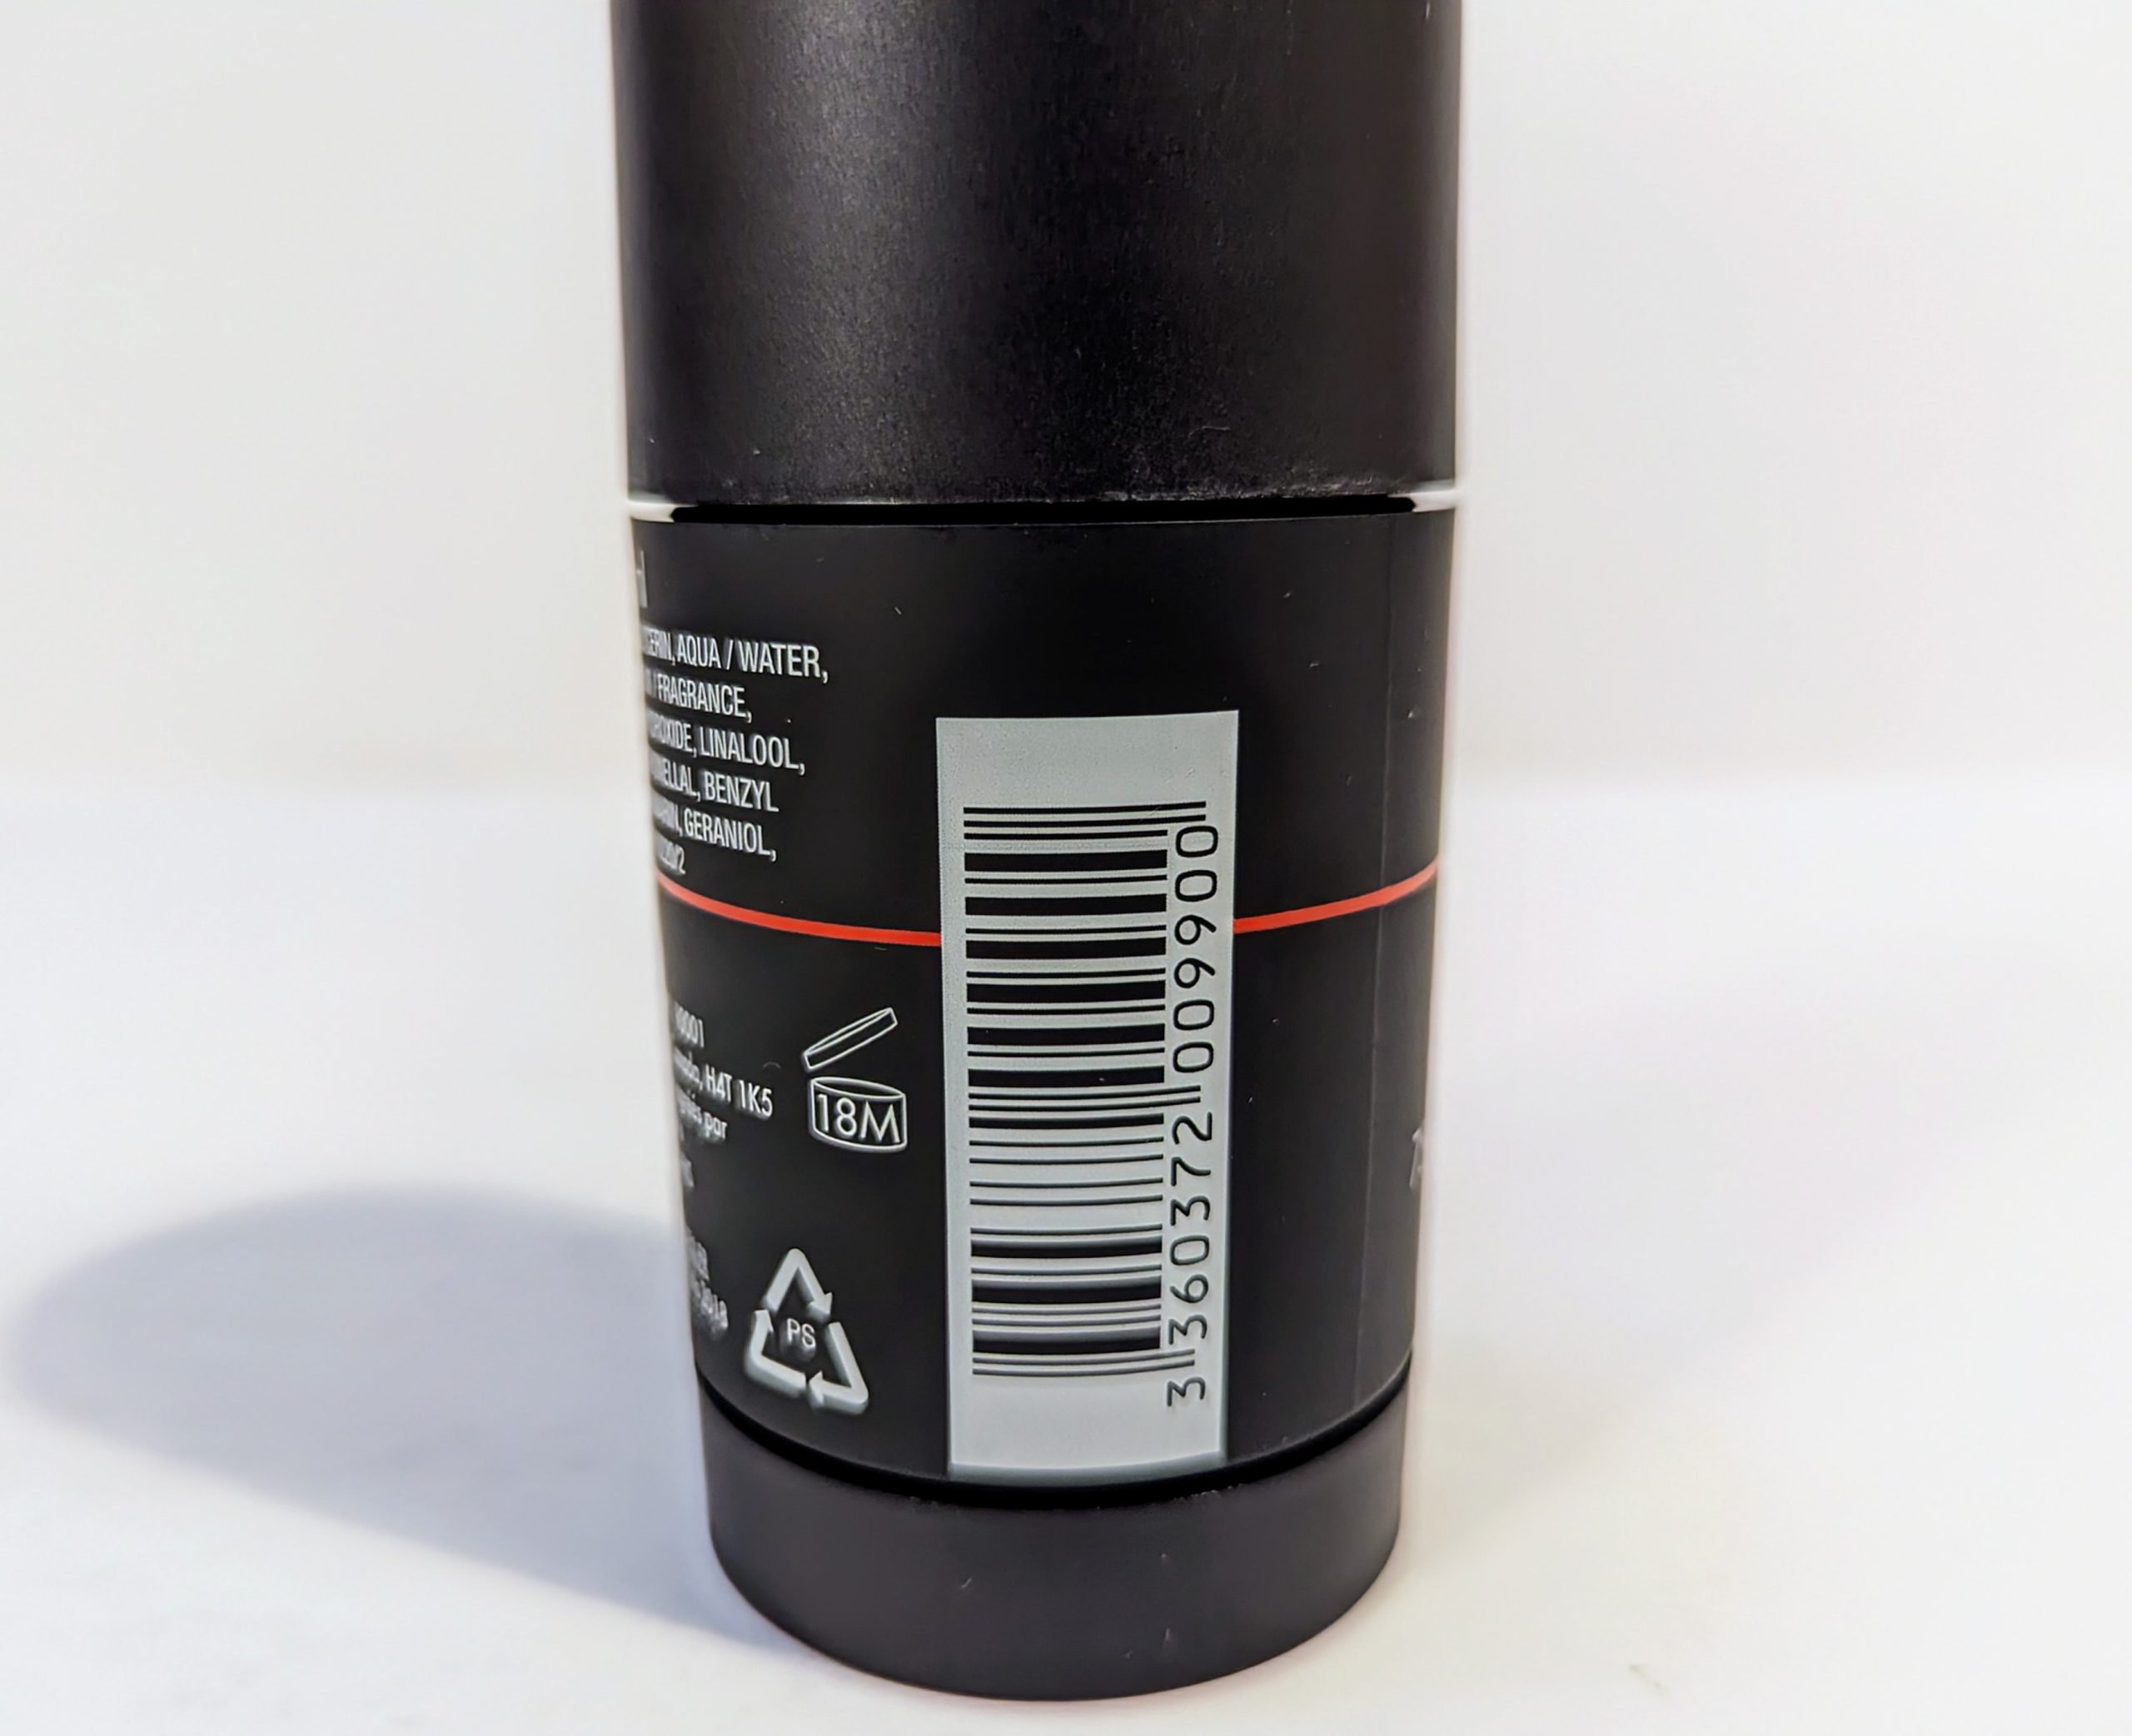 A close-up of a barcode on a cylindrical container with a black label and white text. Recycling symbols and a product longevity icon marked as “18M” are visible below the barcode.